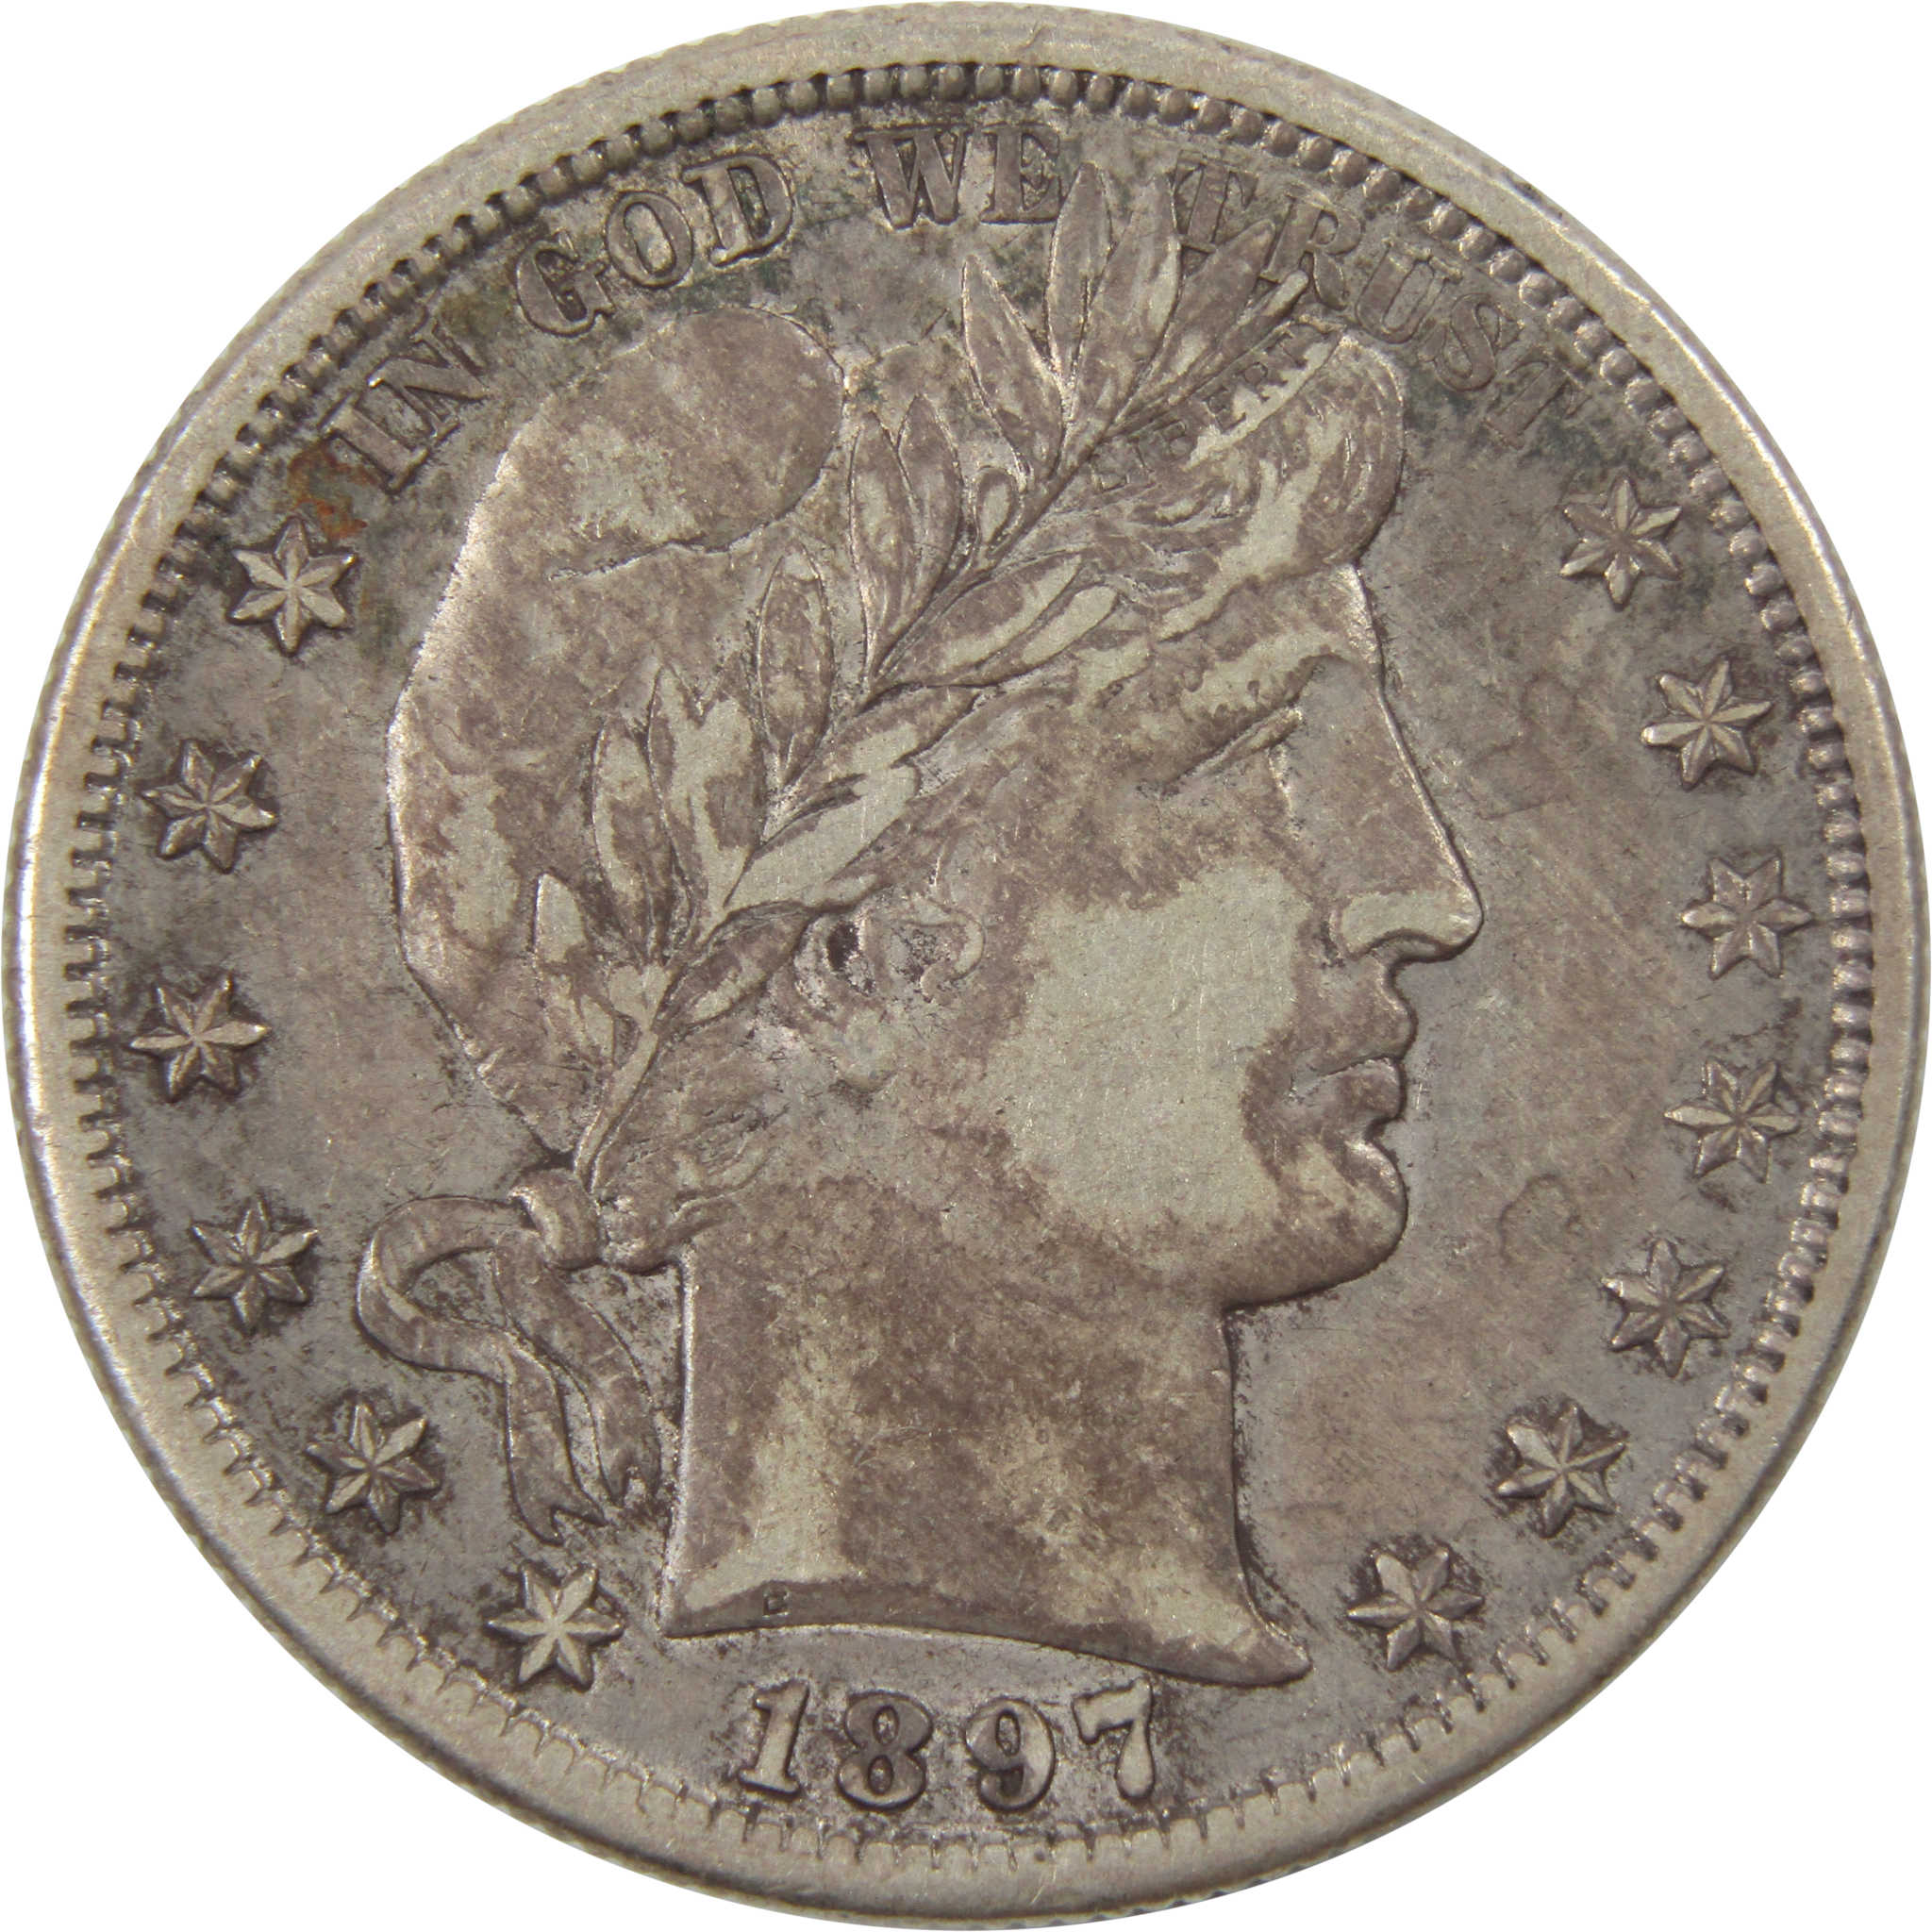 1897 S Barber Half Dollar XF EF Extremely Fine Silver Coin SKU:I10197